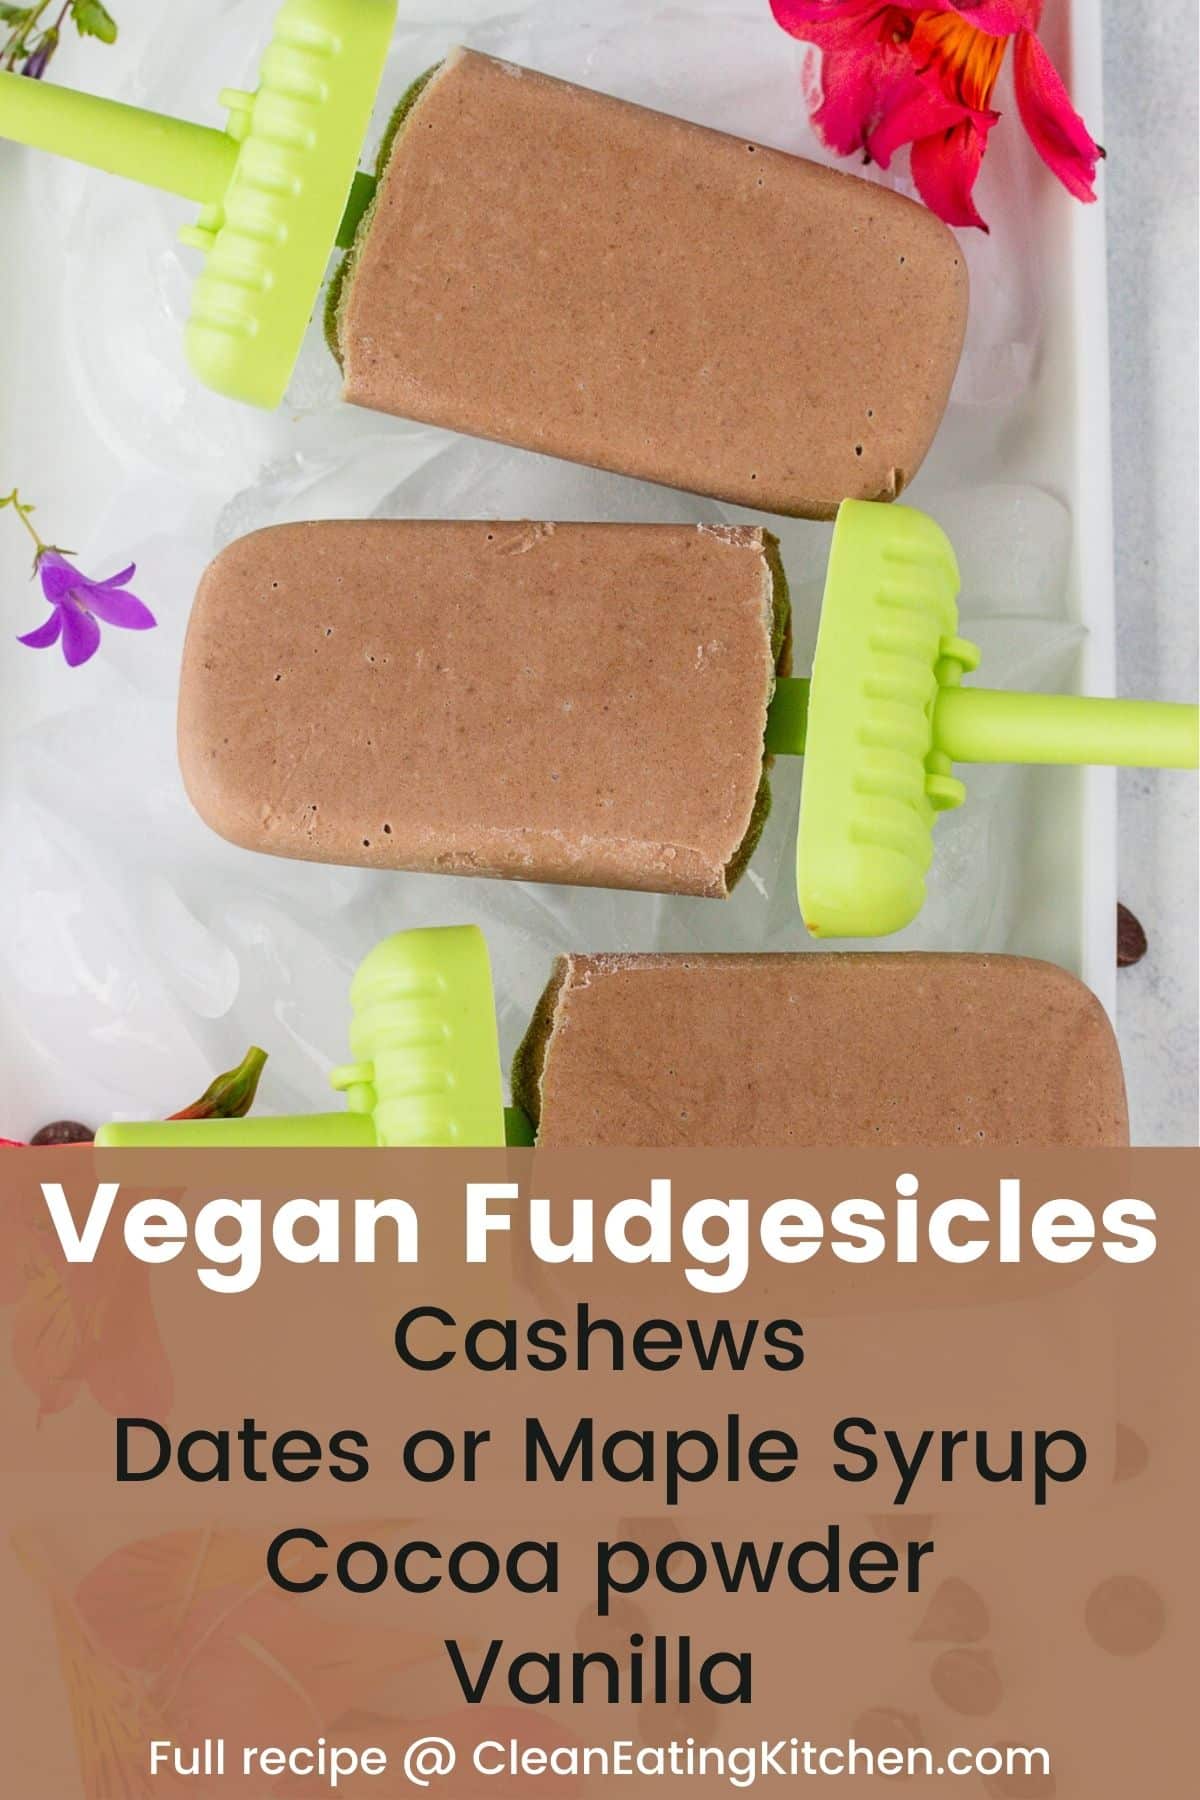 infographic with recipe for fudgesicles